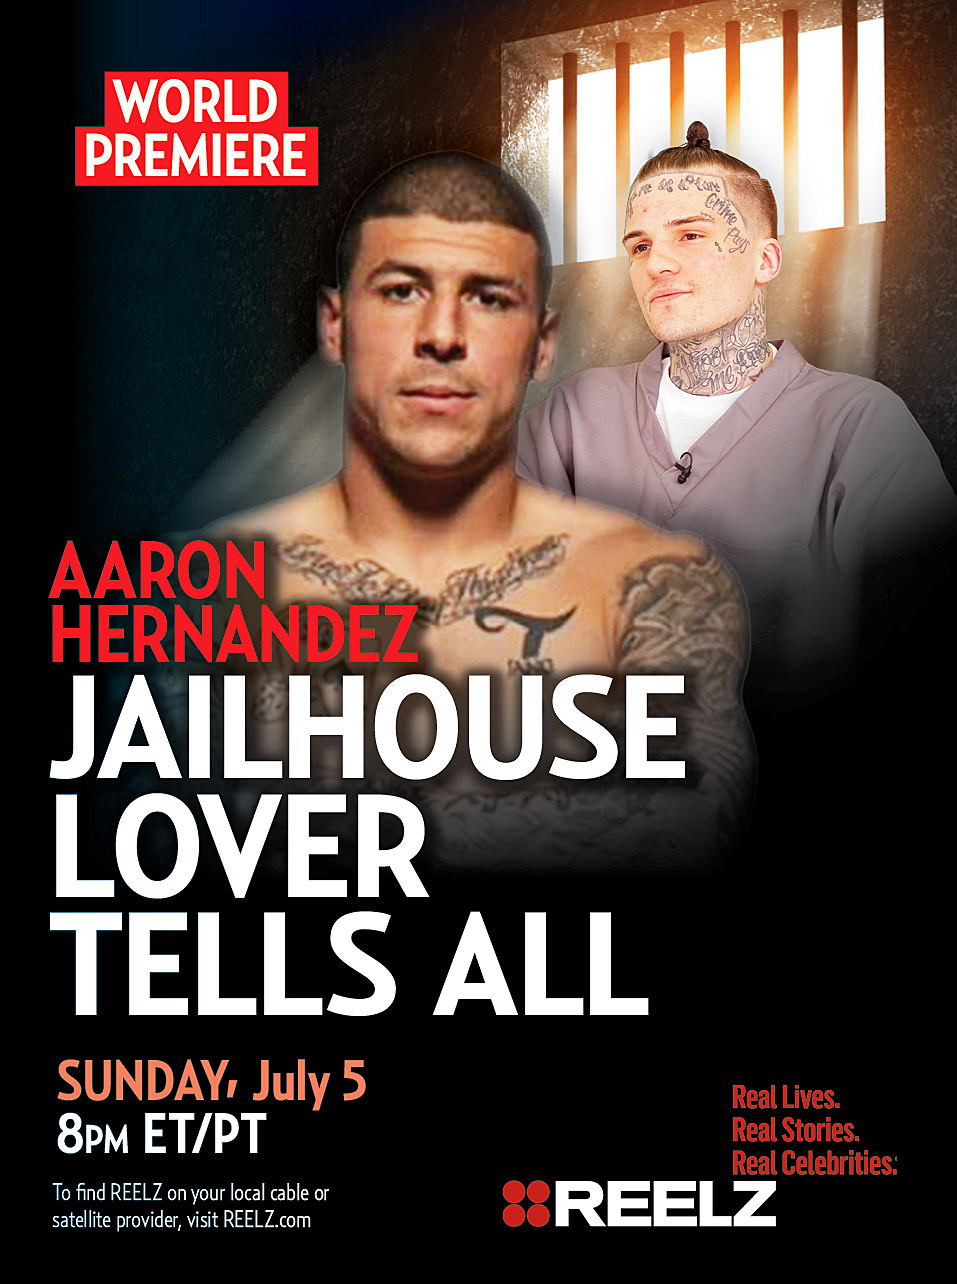 New Details About Aaron Hernandez Gay Lover And Secret Life Before His  Suicide